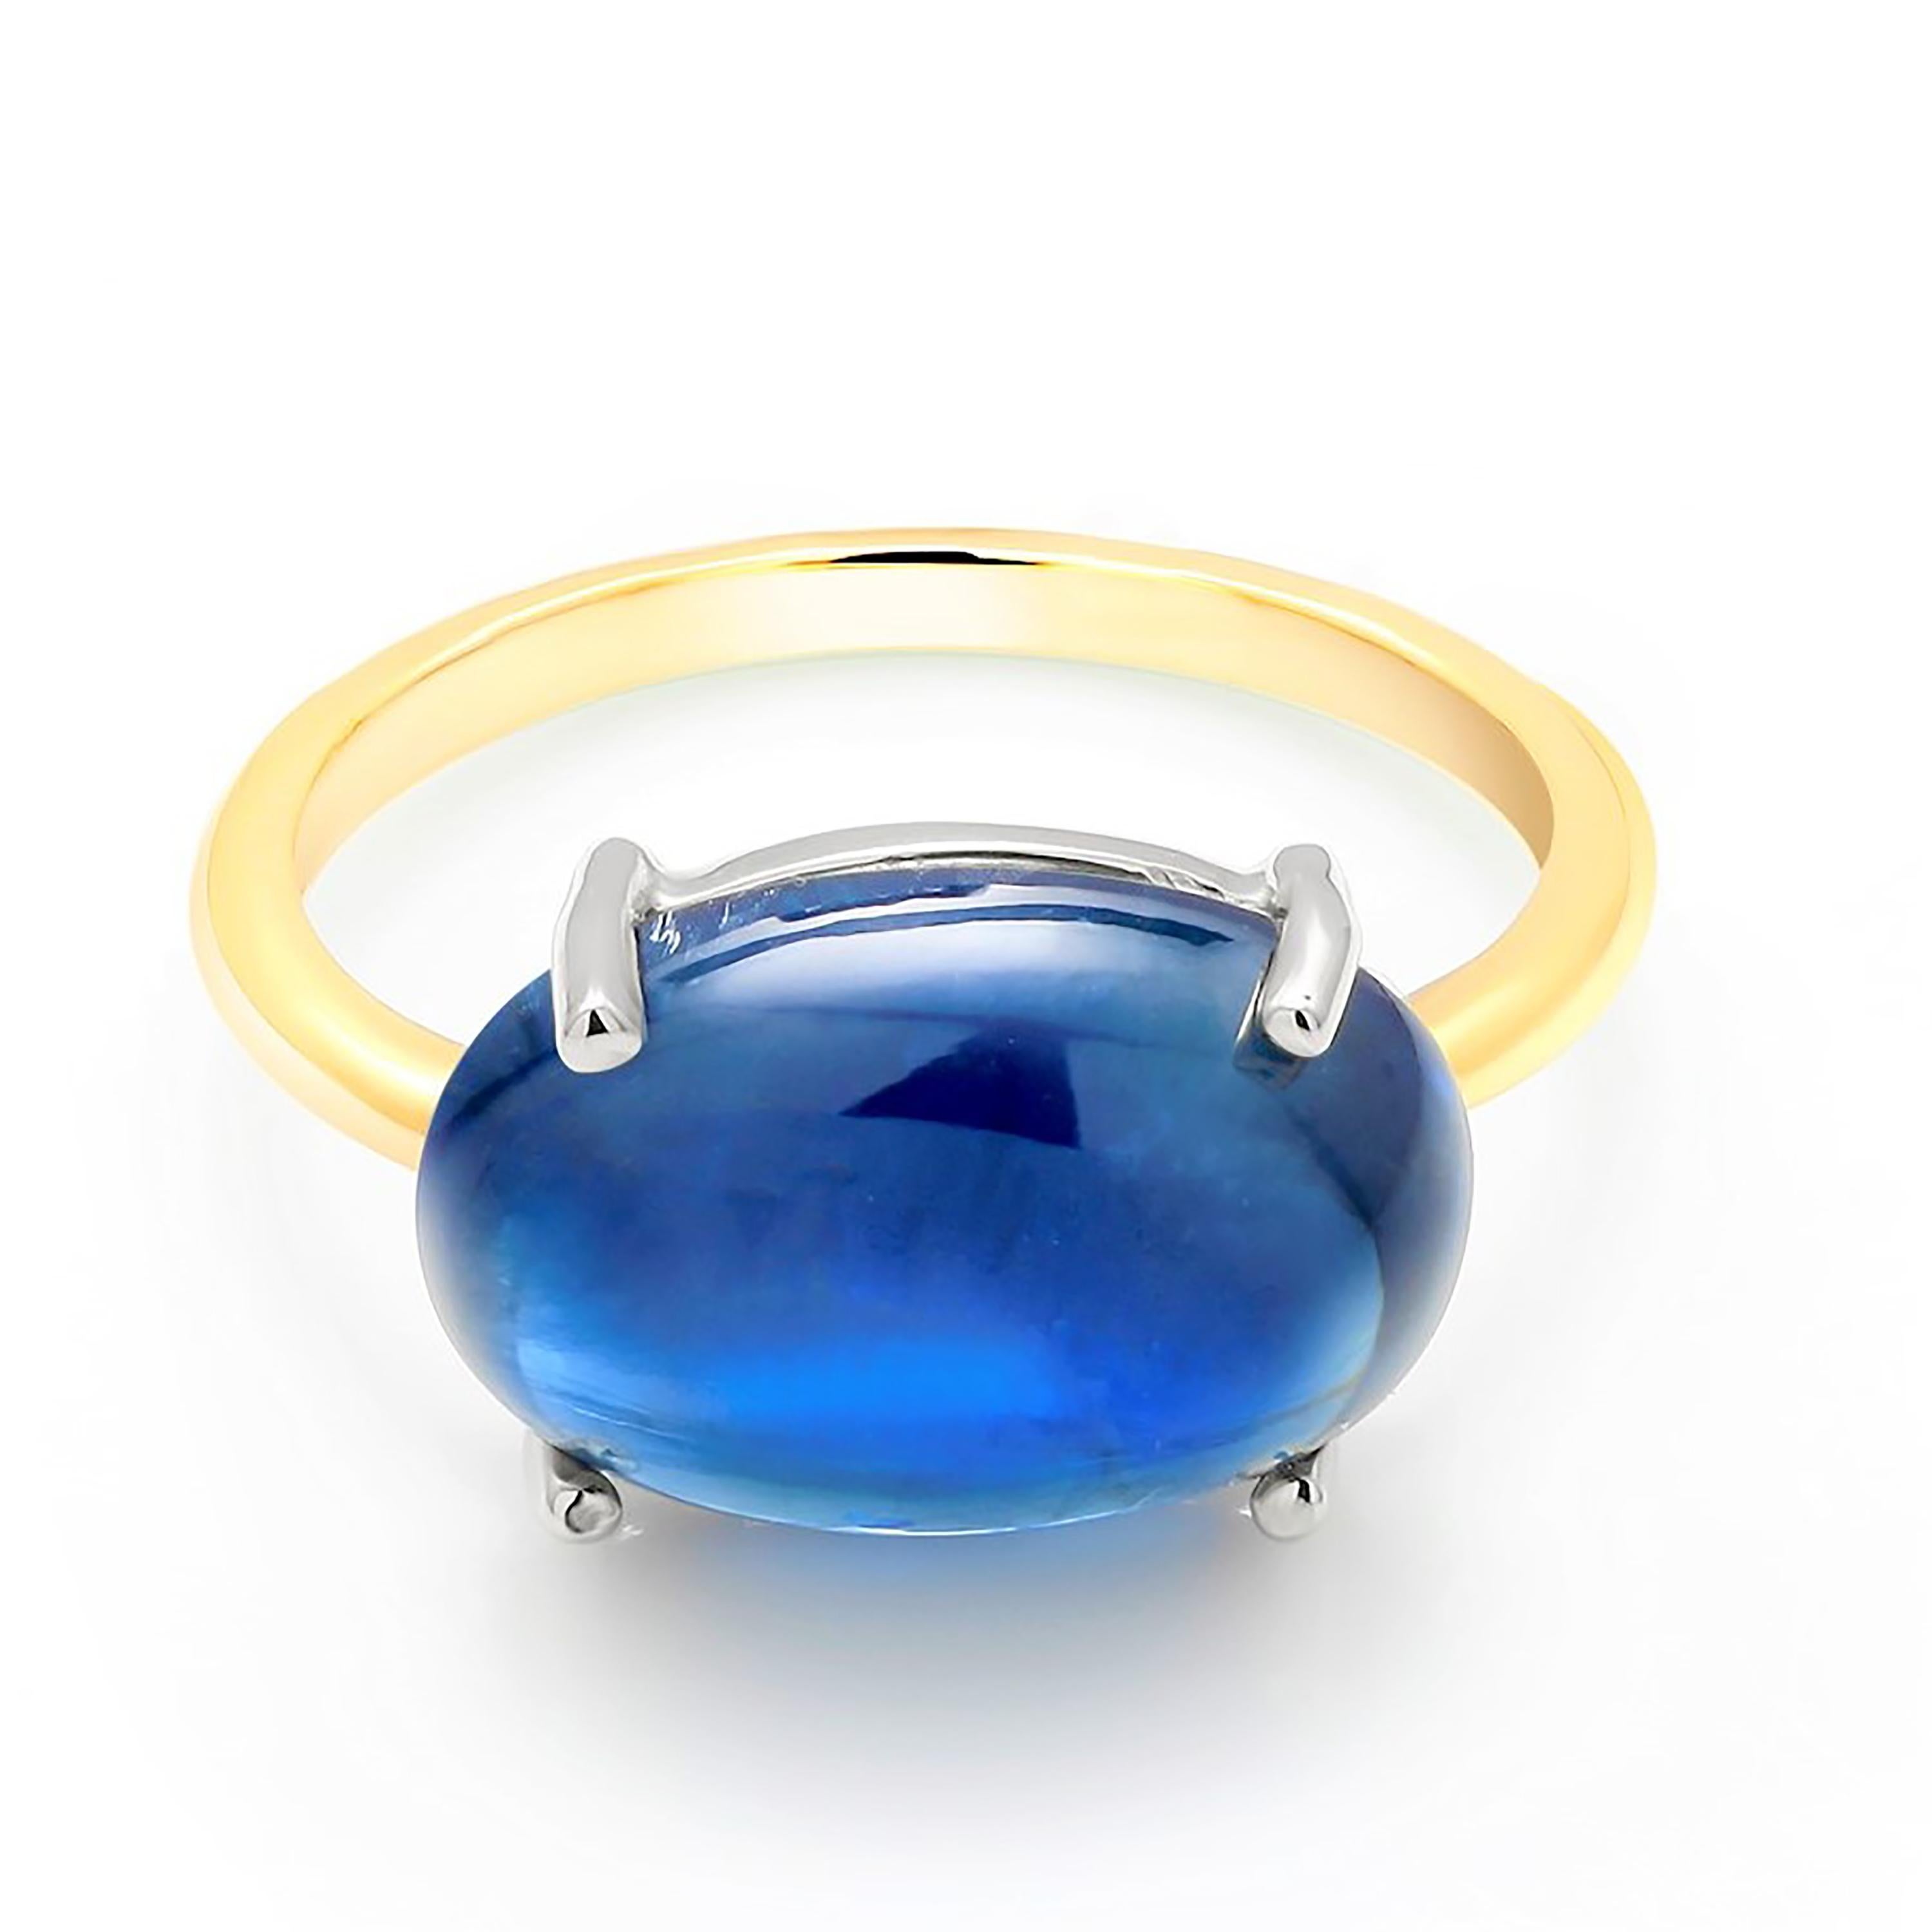 14 karats yellow and white gold cocktail ring
Ceylon cabochon sapphire weighing 5.30 carat
Sapphire measures 12x10
Ring finger size 6
New Ring  of a kind ring 
The ring can be resized
Made in the USA
Our design team select gemstones for their